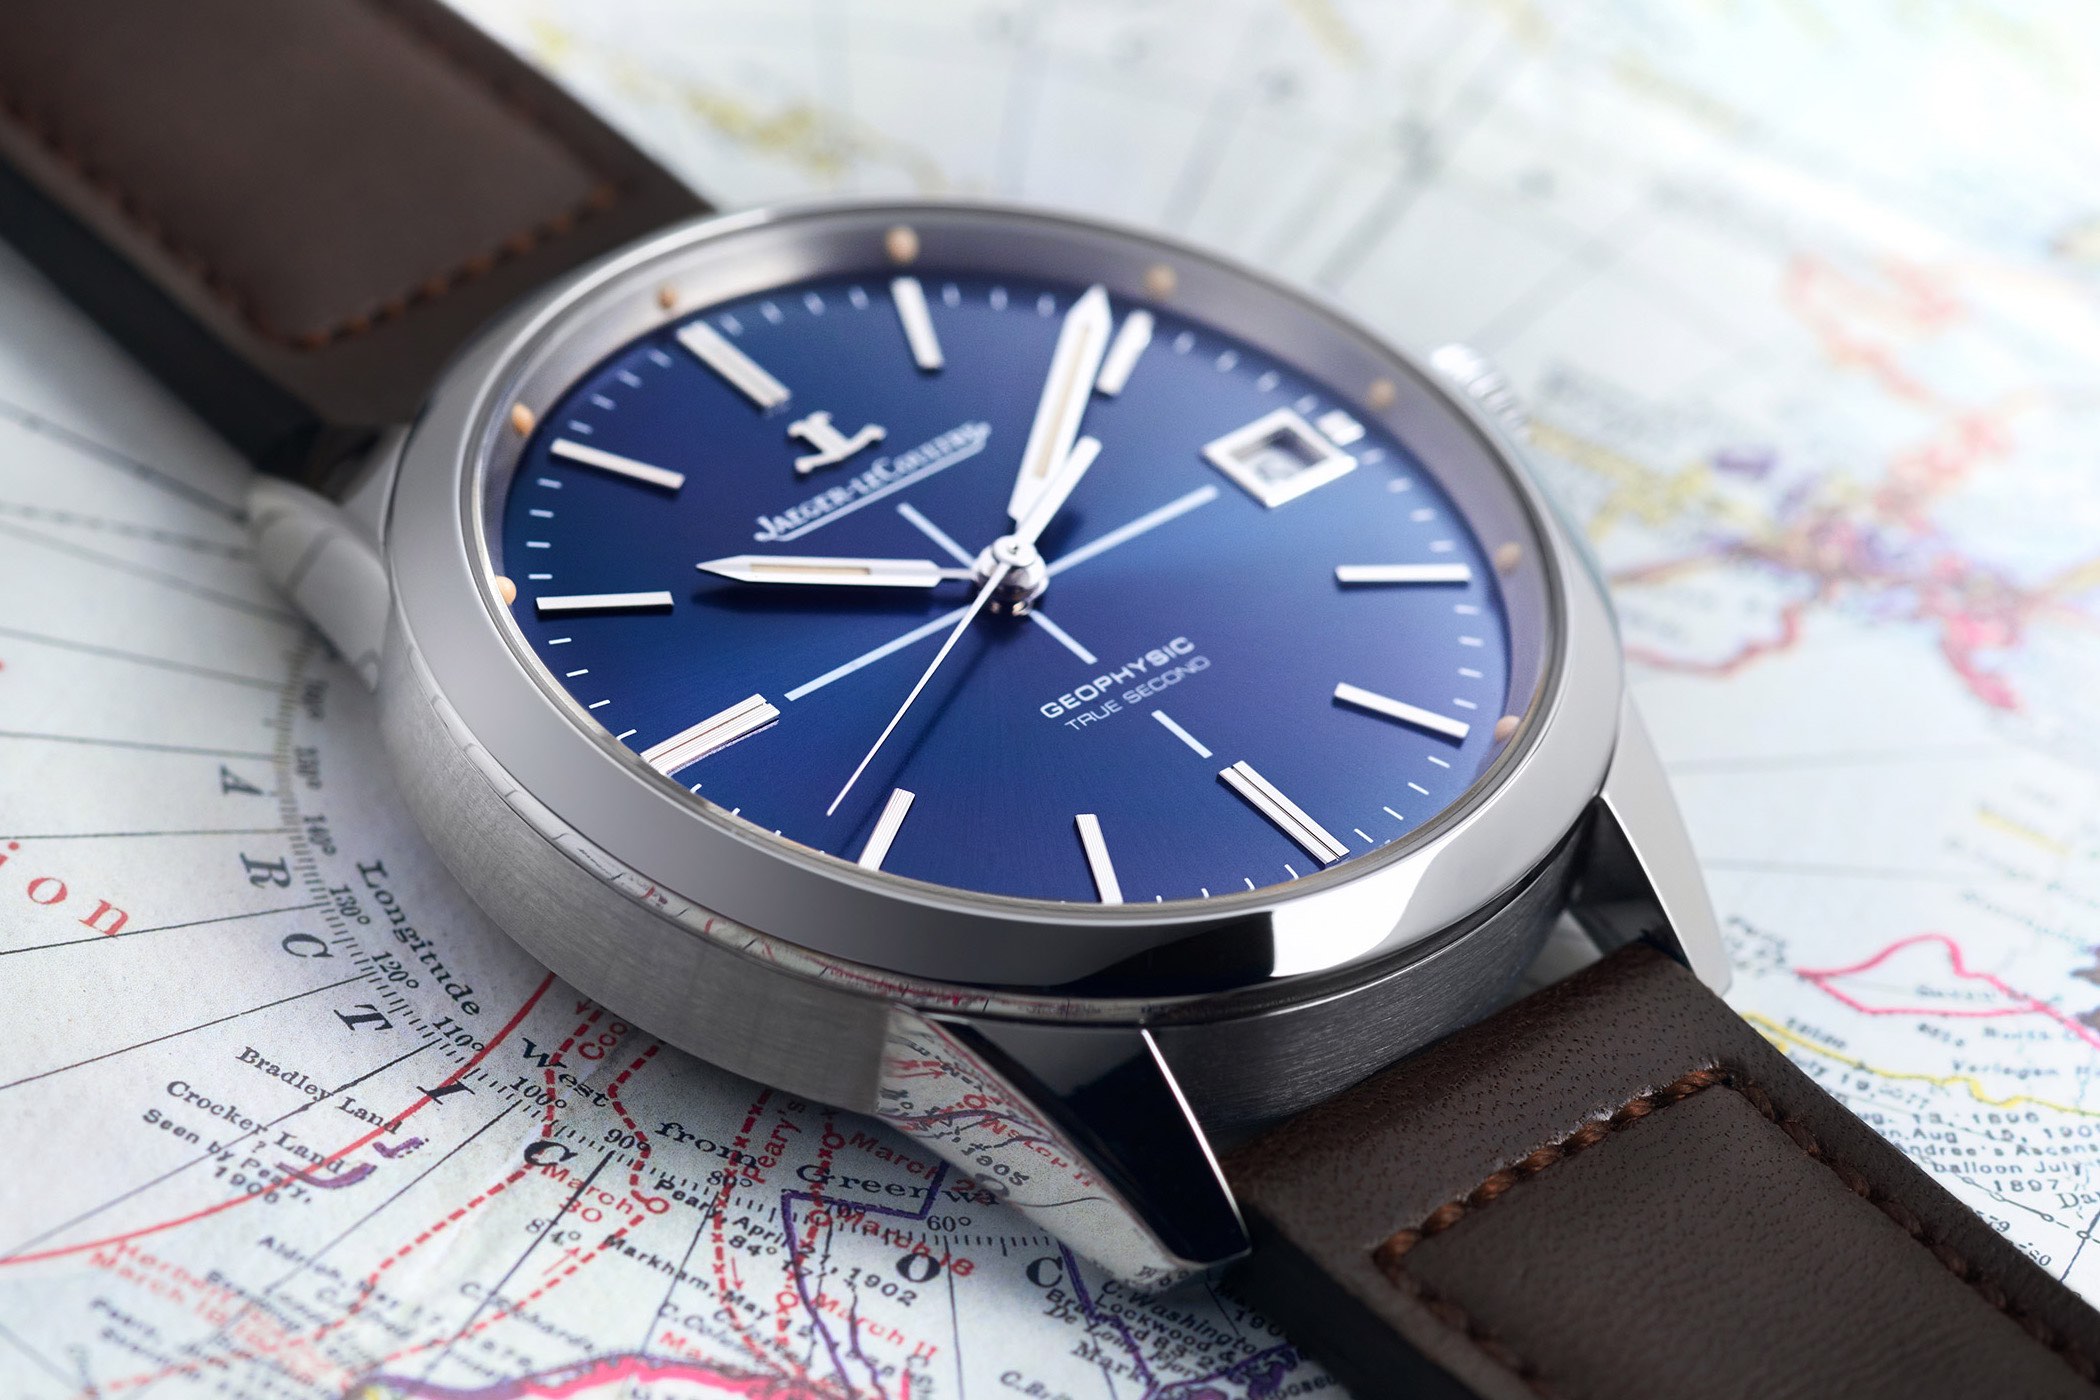 Jaeger-LeCoultre Geophysic True Second Limited Edition Blue Dial